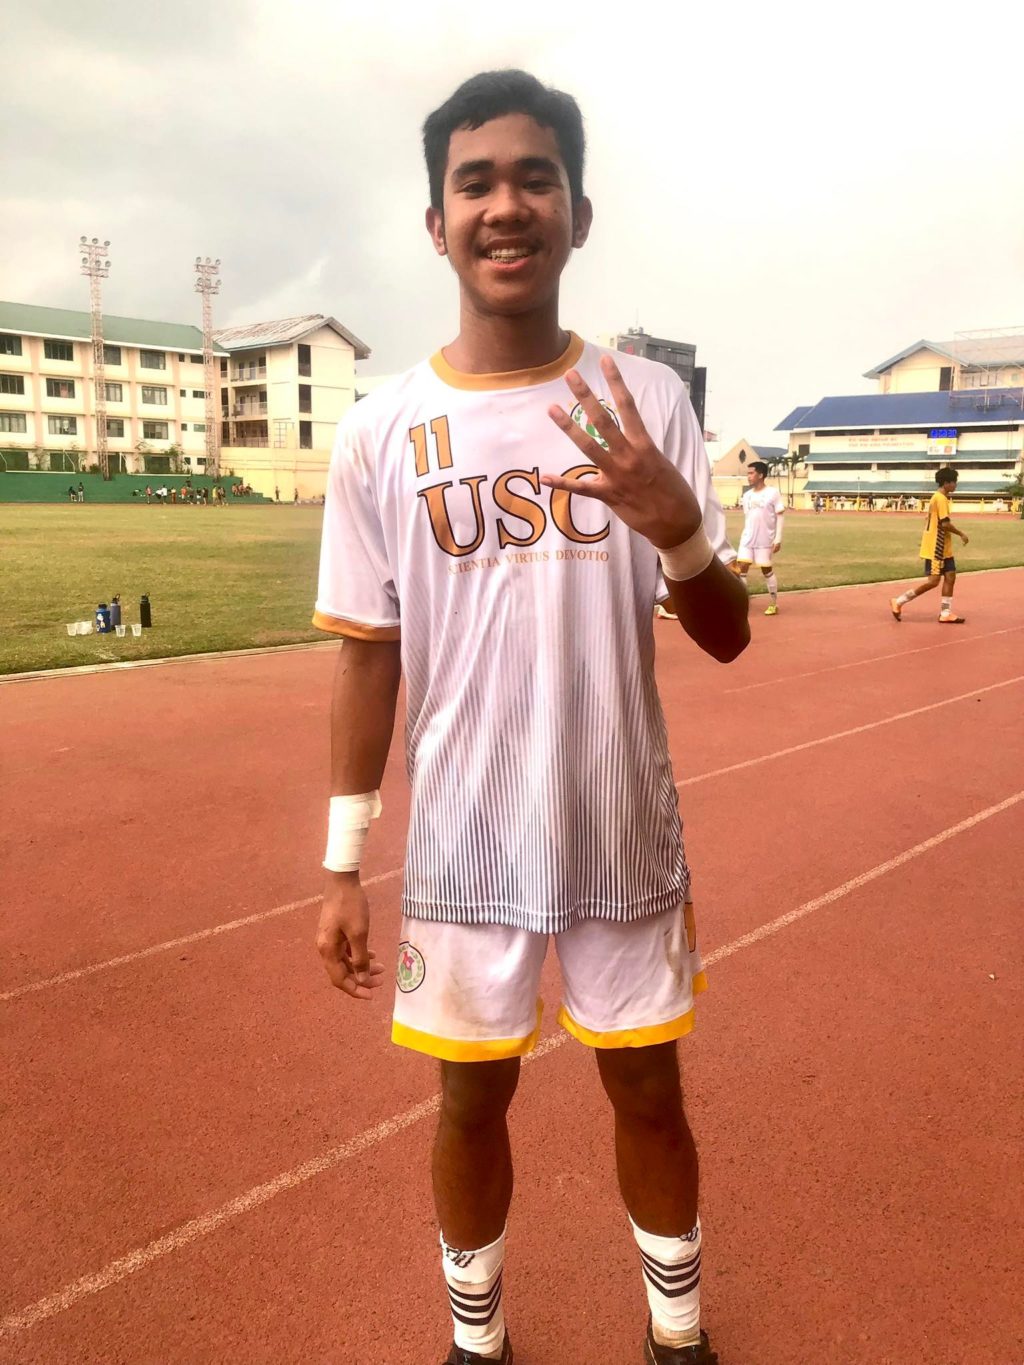  Warriors tame Panthers with a 3-0 win in Cesafi men’s football tournament. In photo is Areli Acuin Gaspe of USC, who is the Man of the Match for USC in the game against USP-F, after he led the USC team to a 3-0 victory over USP-F on Nov. 30 Cesafi men’s football game at the Cebu City Sports Center. | Contributed photo